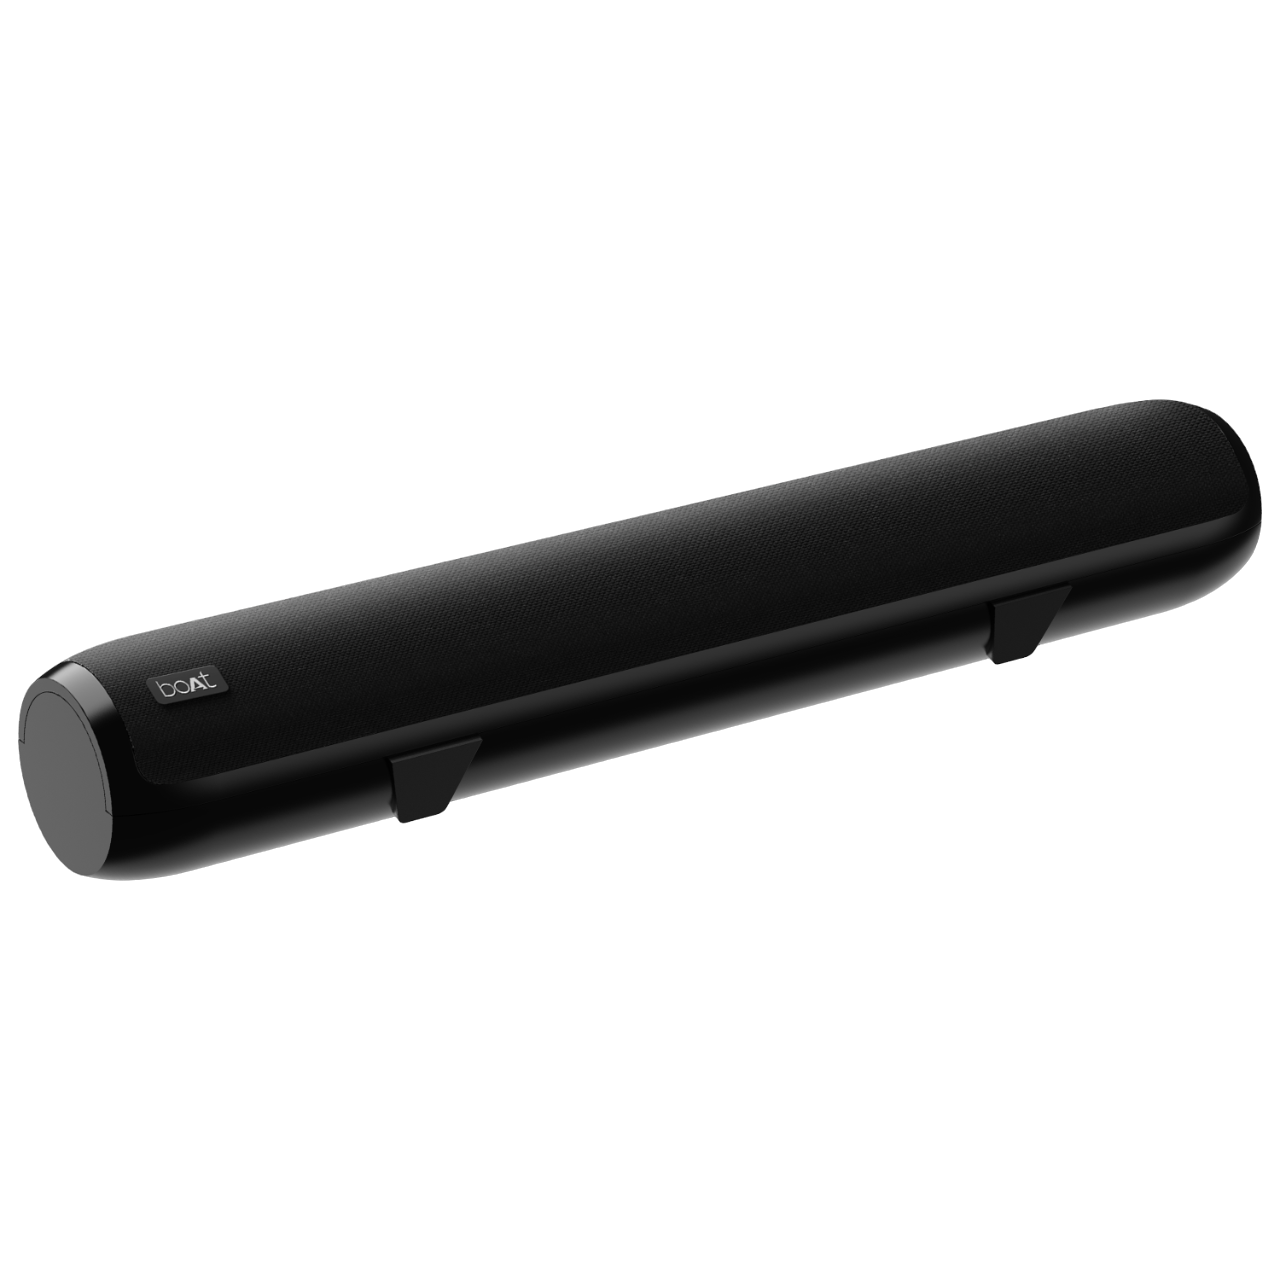 boAt Aavante Bar 610 | 25W Bluetooth Soundbar with 6 Hours Battery Backup, 2.0 Channel, Dual Passive Radiators, Carry & Connect With Ease, BT, AUX